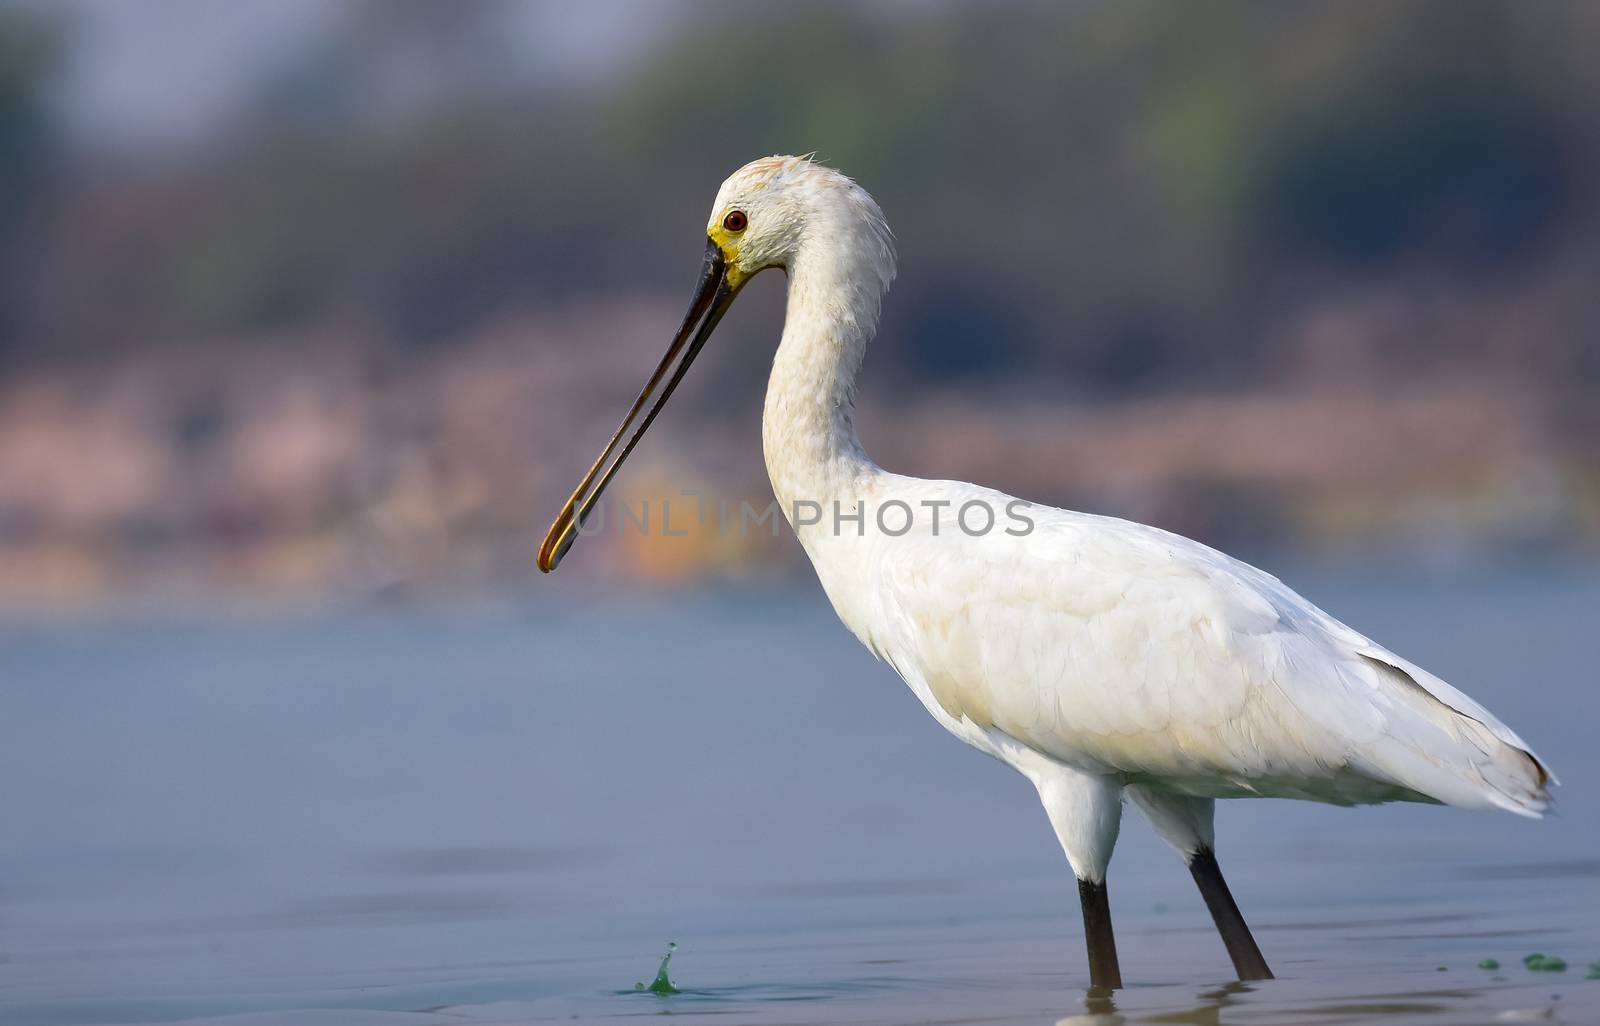 Spoonbill is Distinctive, large white wading bird with a spatula for a bill. Adult has short crest, yellowish breast patch. First year has paler bill, with fine black wingtips visible in flight.